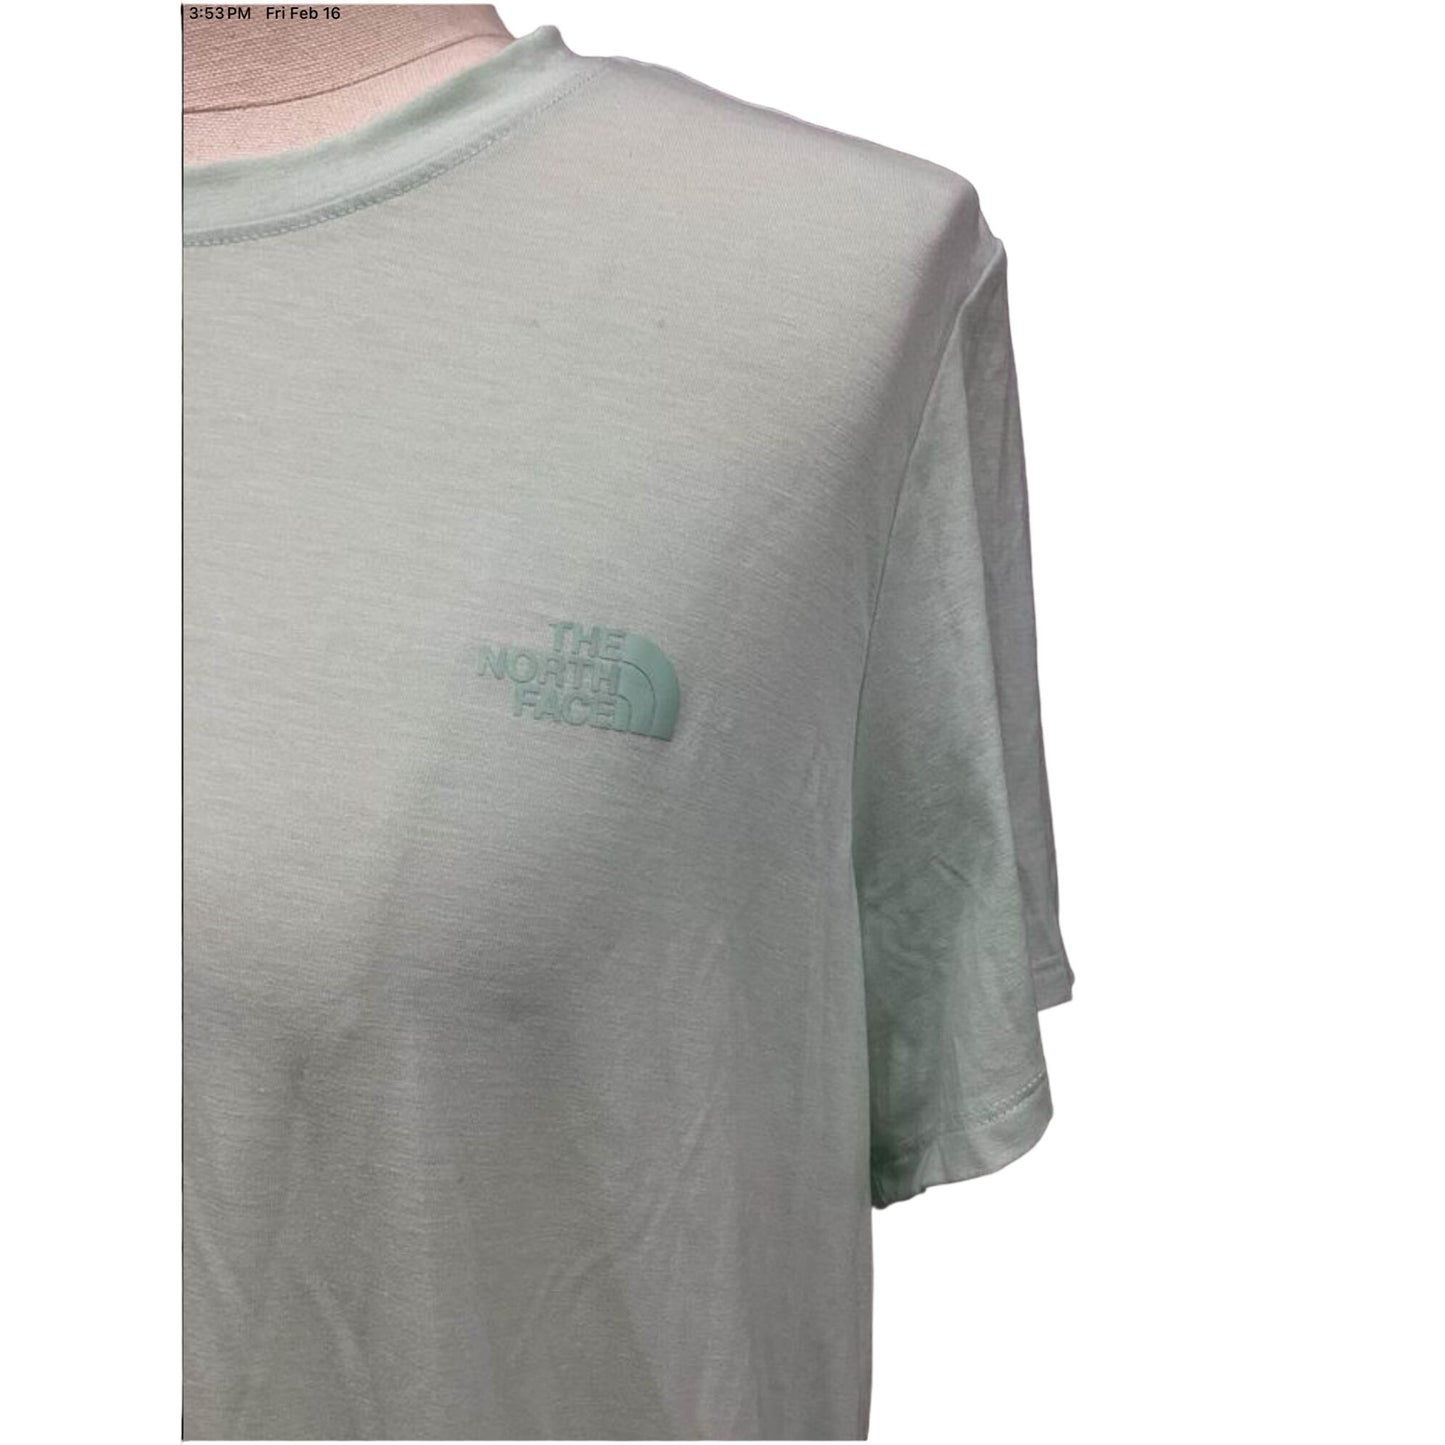 The North Face Women’s Tshirt